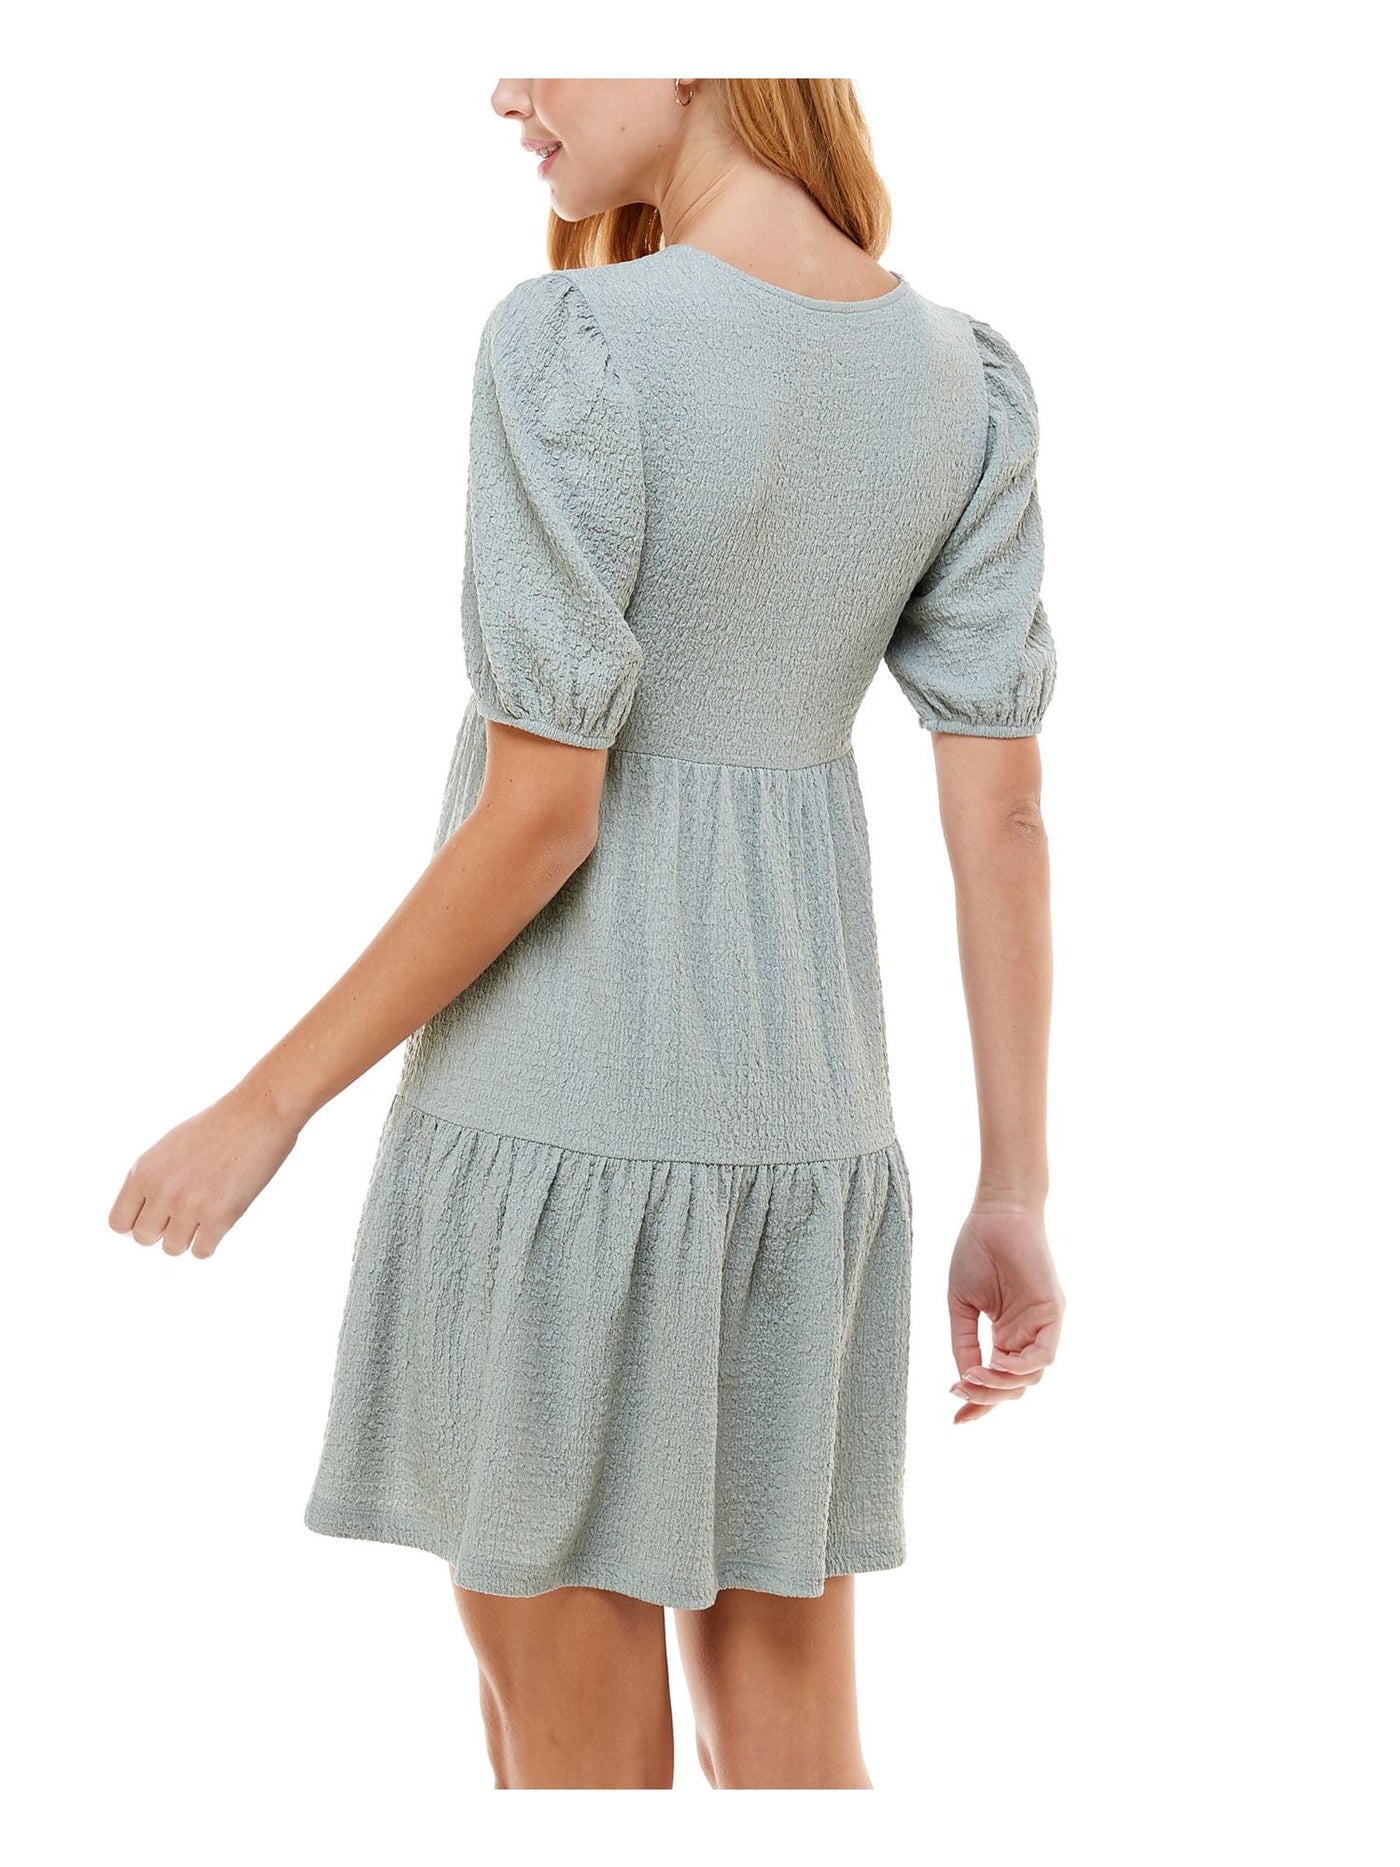 CRYSTAL DOLLS Womens Stretch Textured Tiered Skirt  Pullover Styling Pouf Sleeve Jewel Neck Short Fit + Flare Dress